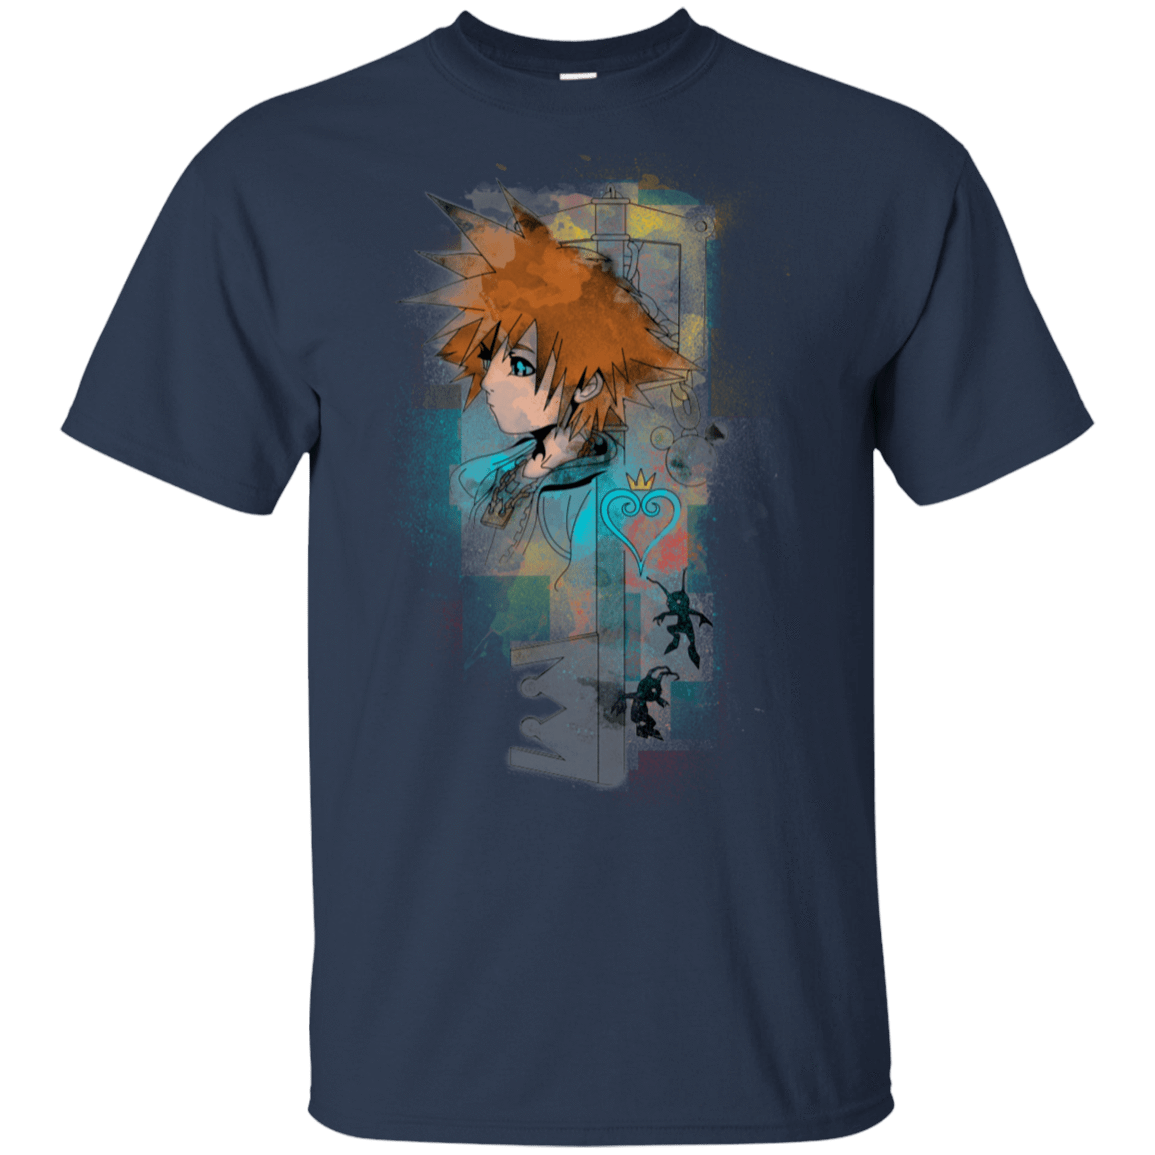 T-Shirts Navy / S Kingdom of Water Colors T-Shirt